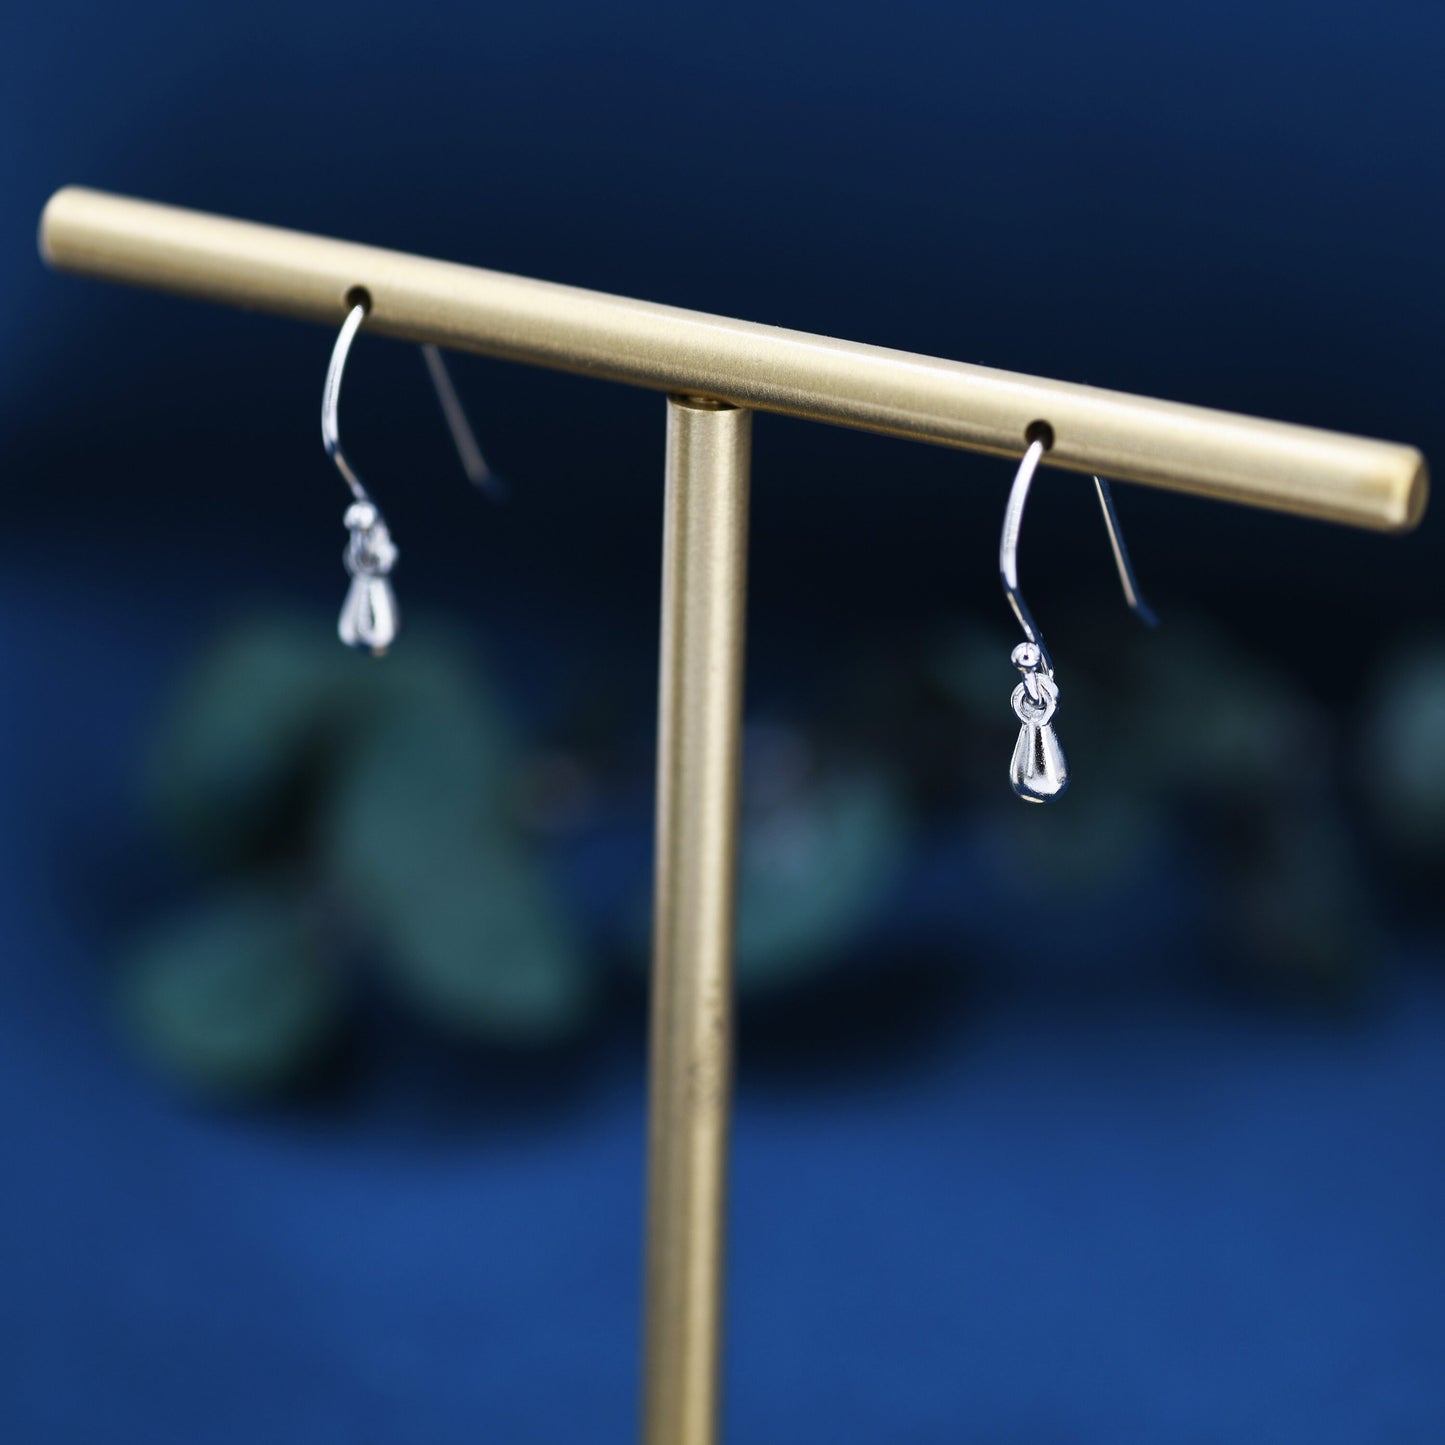 Extra Tiny Droplet Drop Hook Earrings in Sterling Silver, Barely There Dangle Earrings, Very Small Waterdrop Earrings, Raindrop Earrings